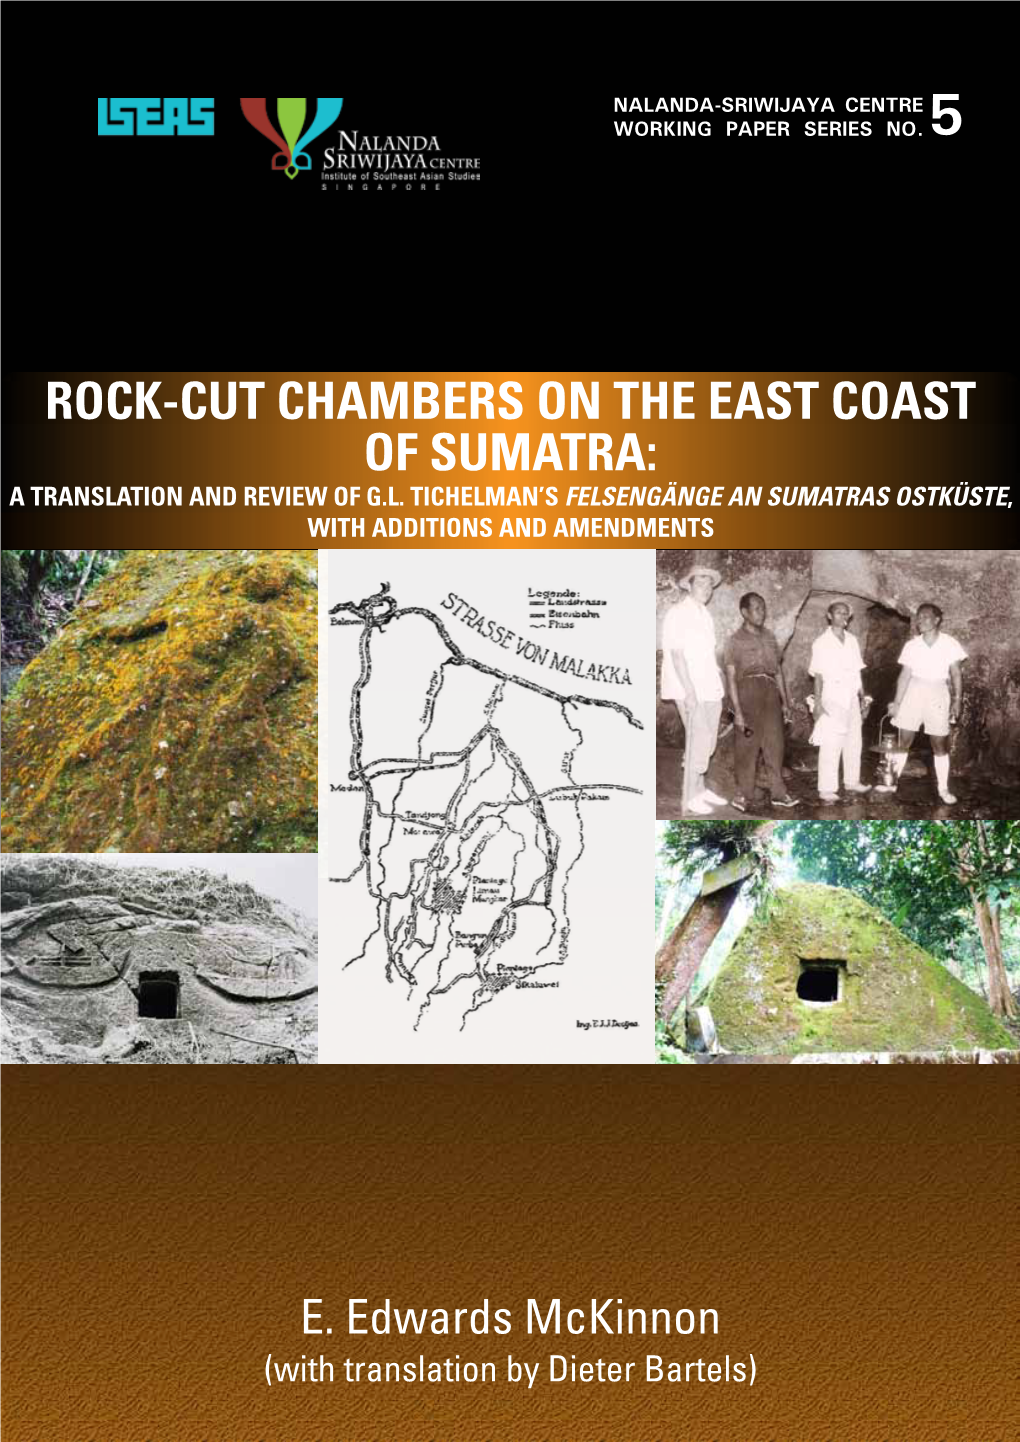 Rock-Cut Chambers on the East Coast of Sumatra: a Translation and Review of G.L